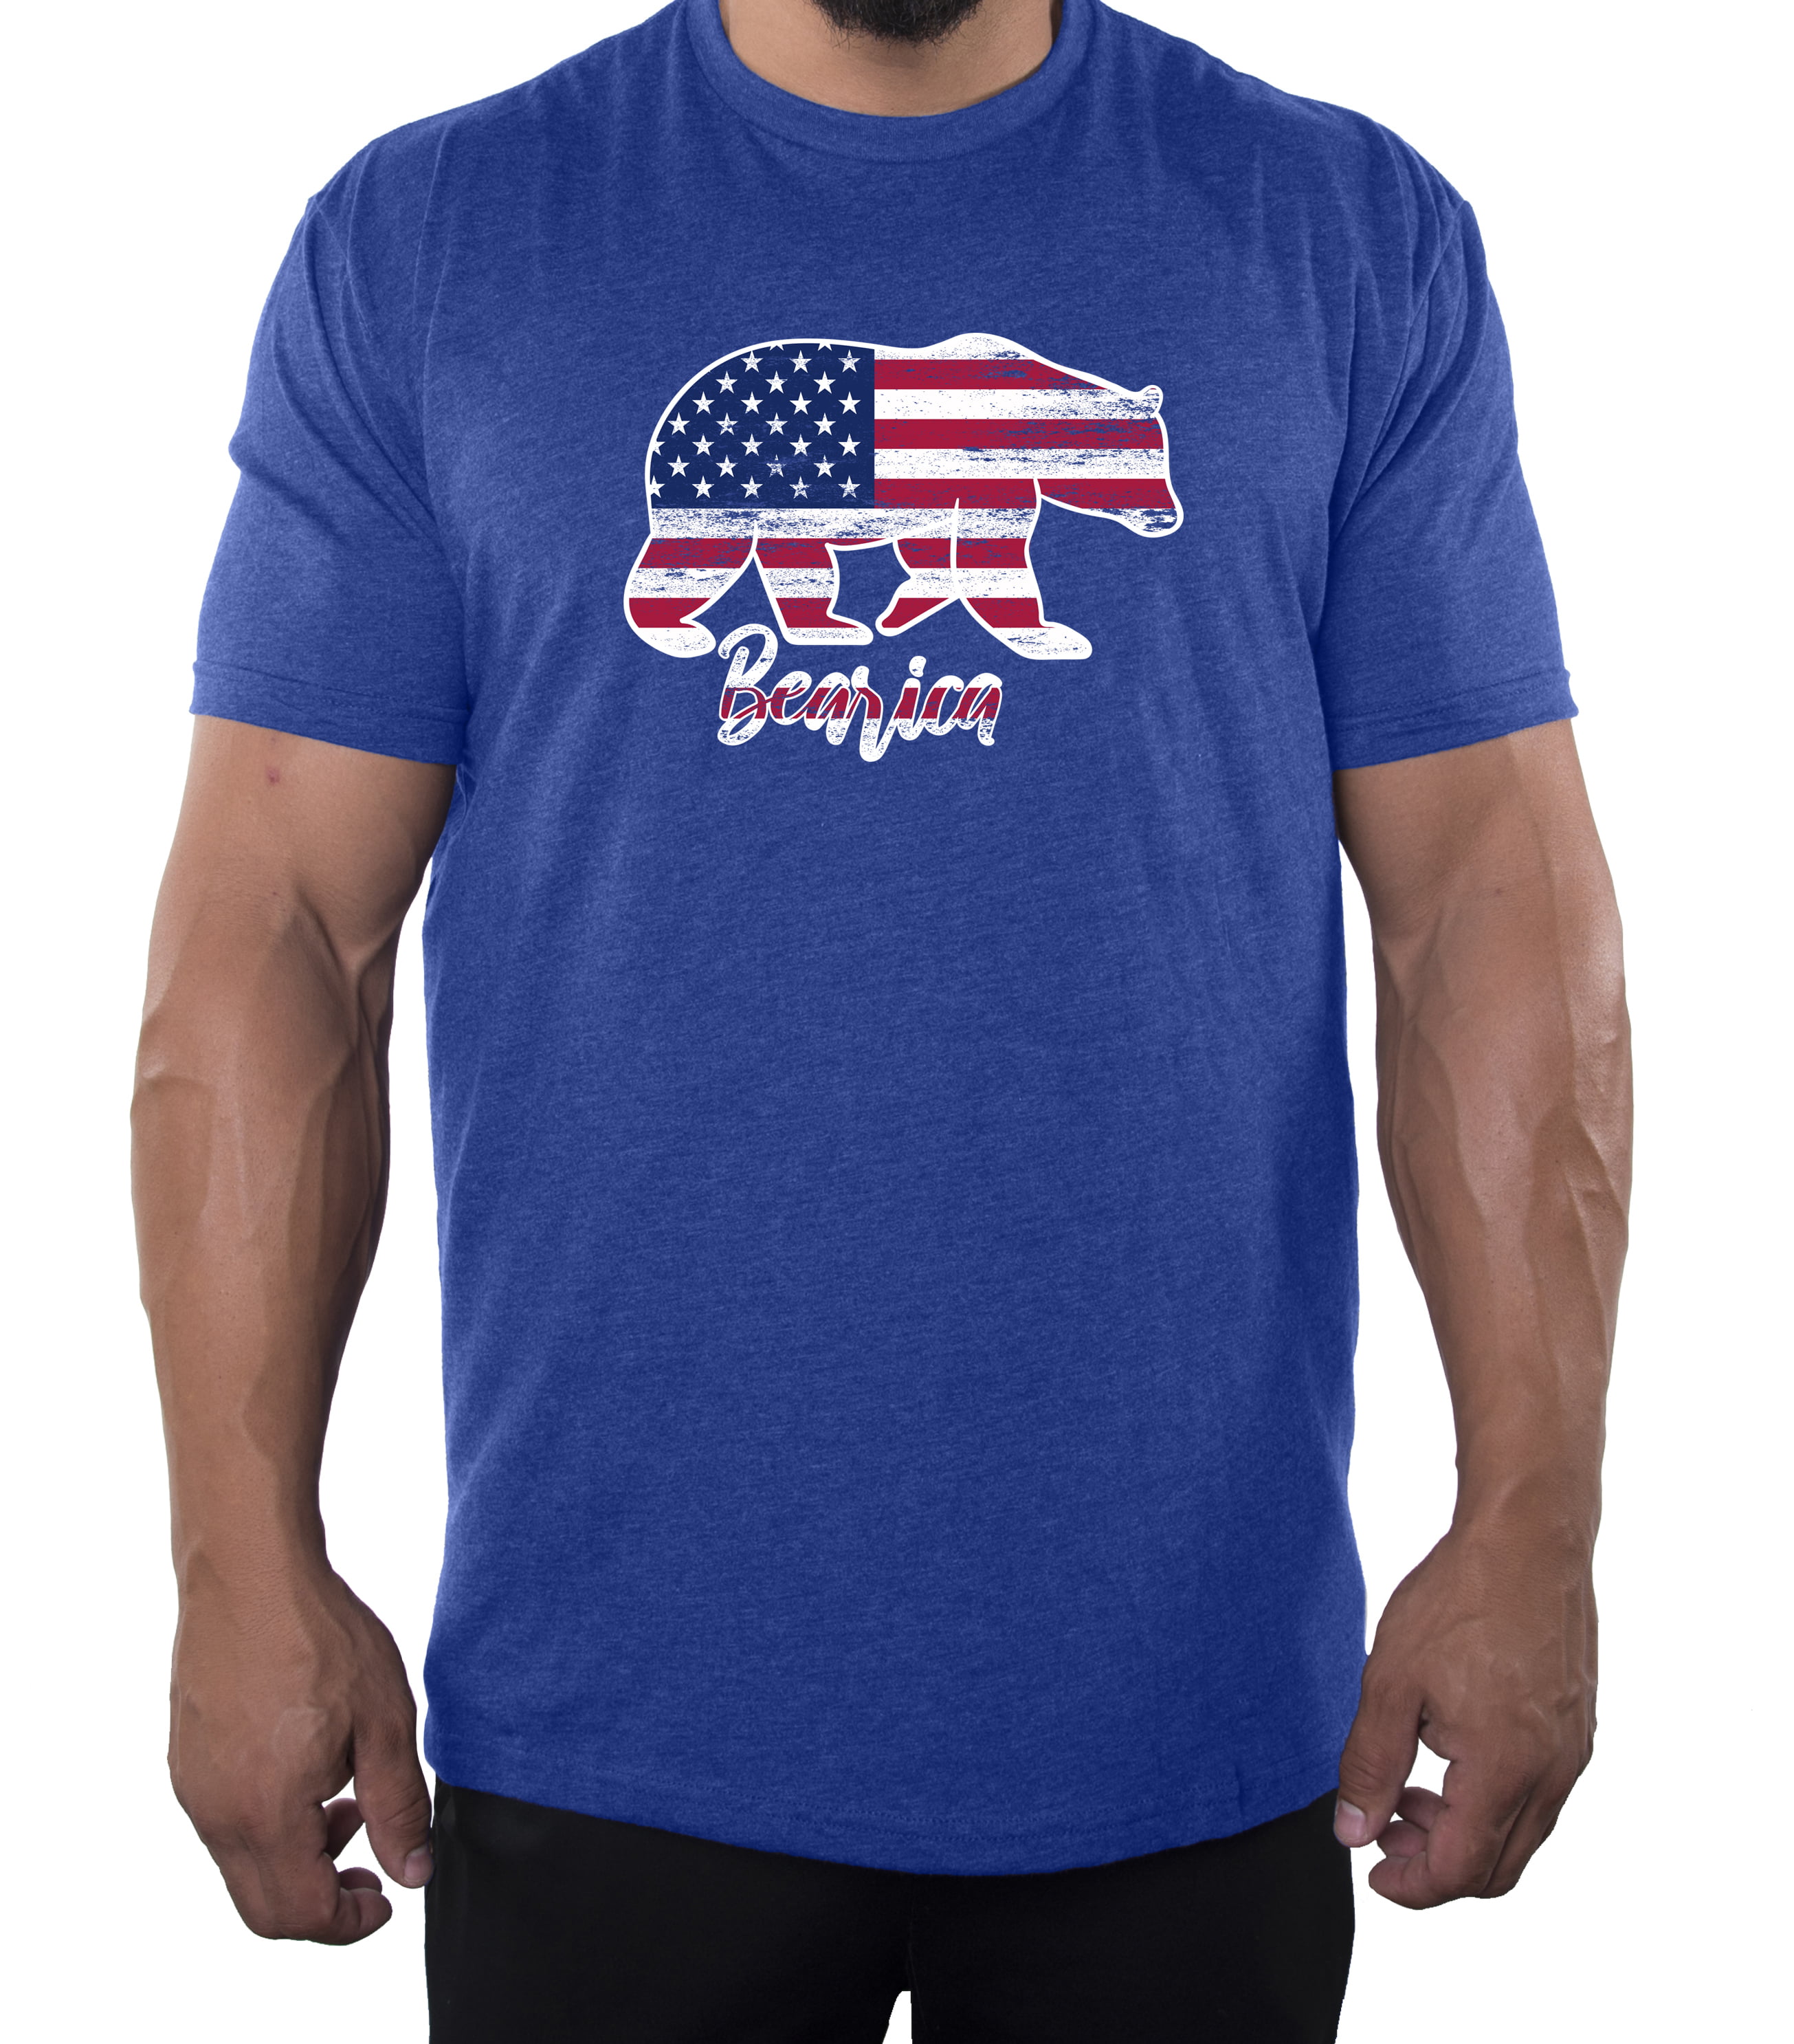 American Pride Men's Graphic T-Shirt I Support American Oil From American Soil Americana